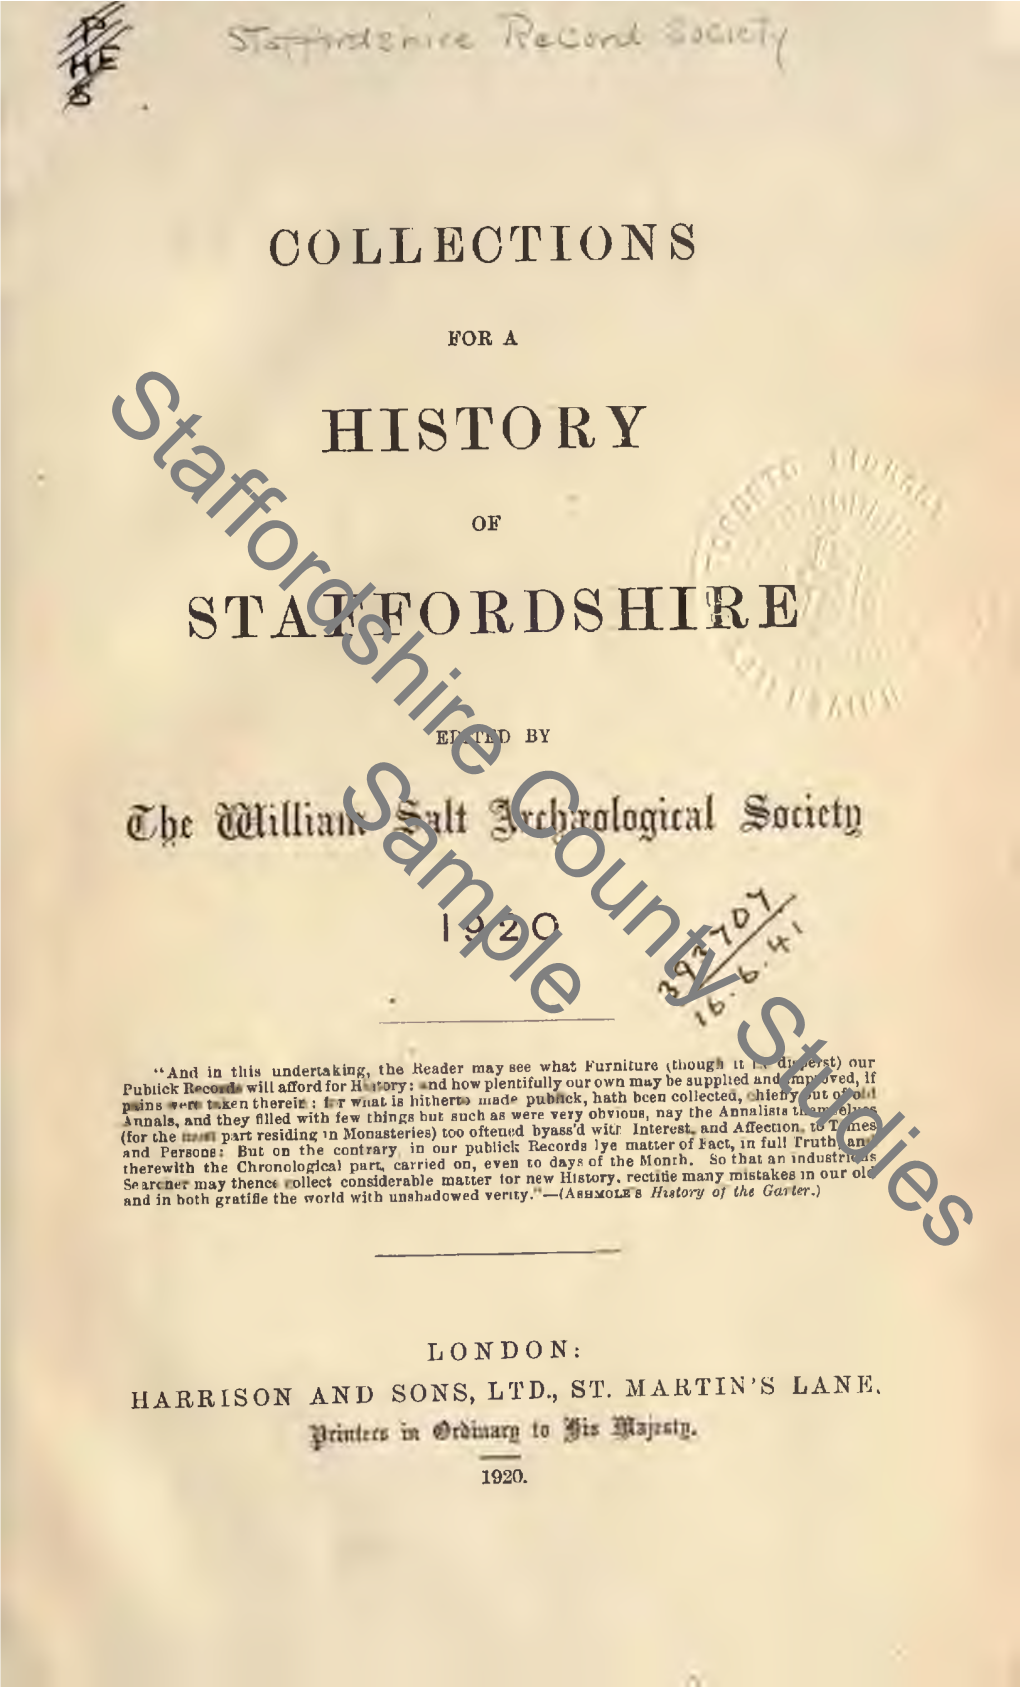 Collections for a History of Staffordshire, 1920-22